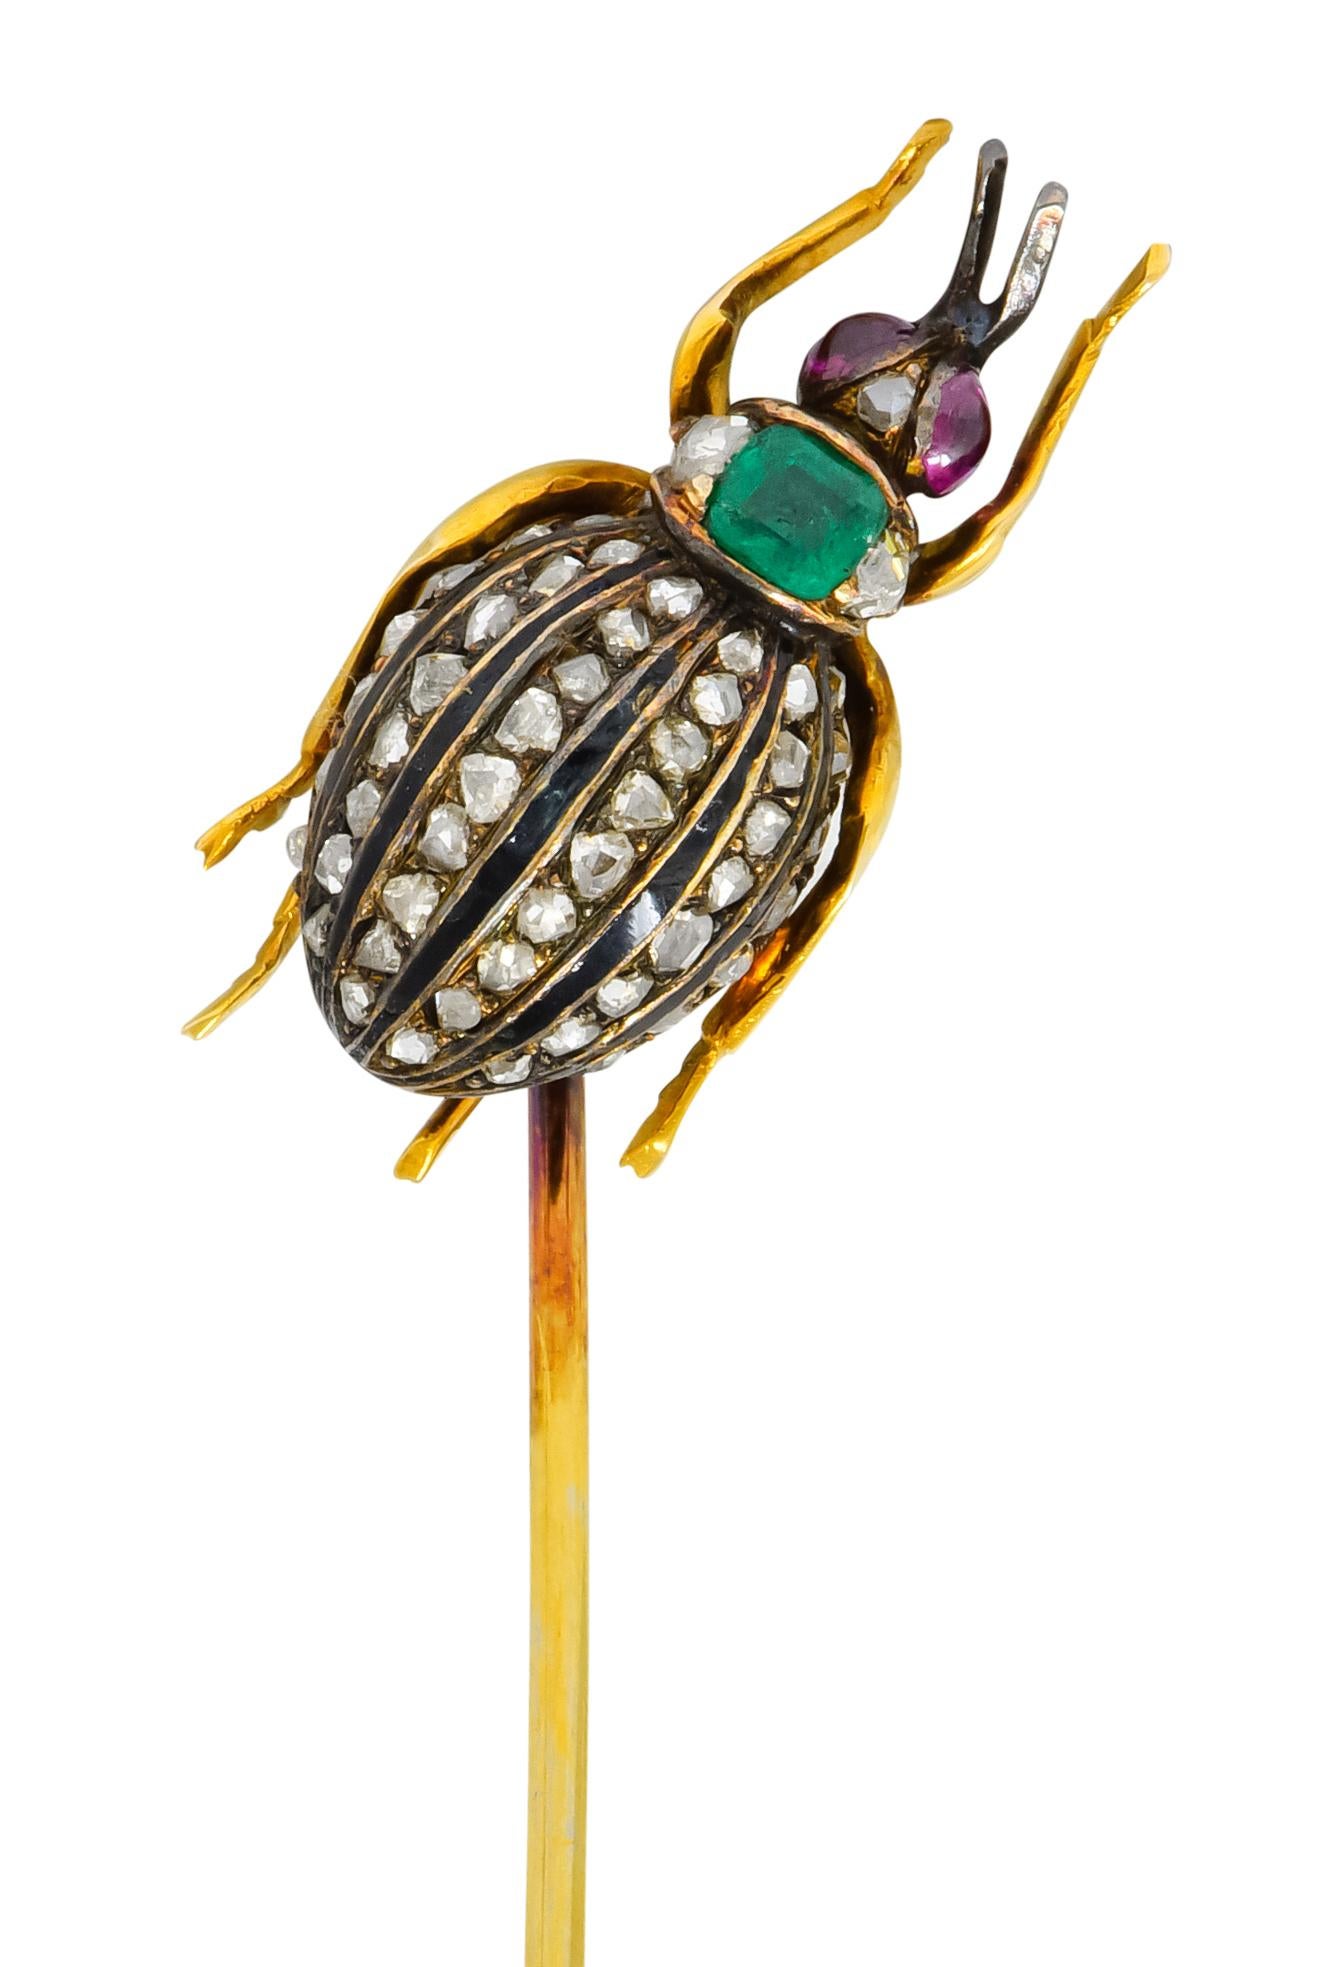 Designed as a weevil insect with a largely domed abdomen decorated with lines of rose cut diamonds alternating with black enamel stripes

Thorax is comprised of central cushion cut emerald, transparent and bright verdant green in color, flanked by